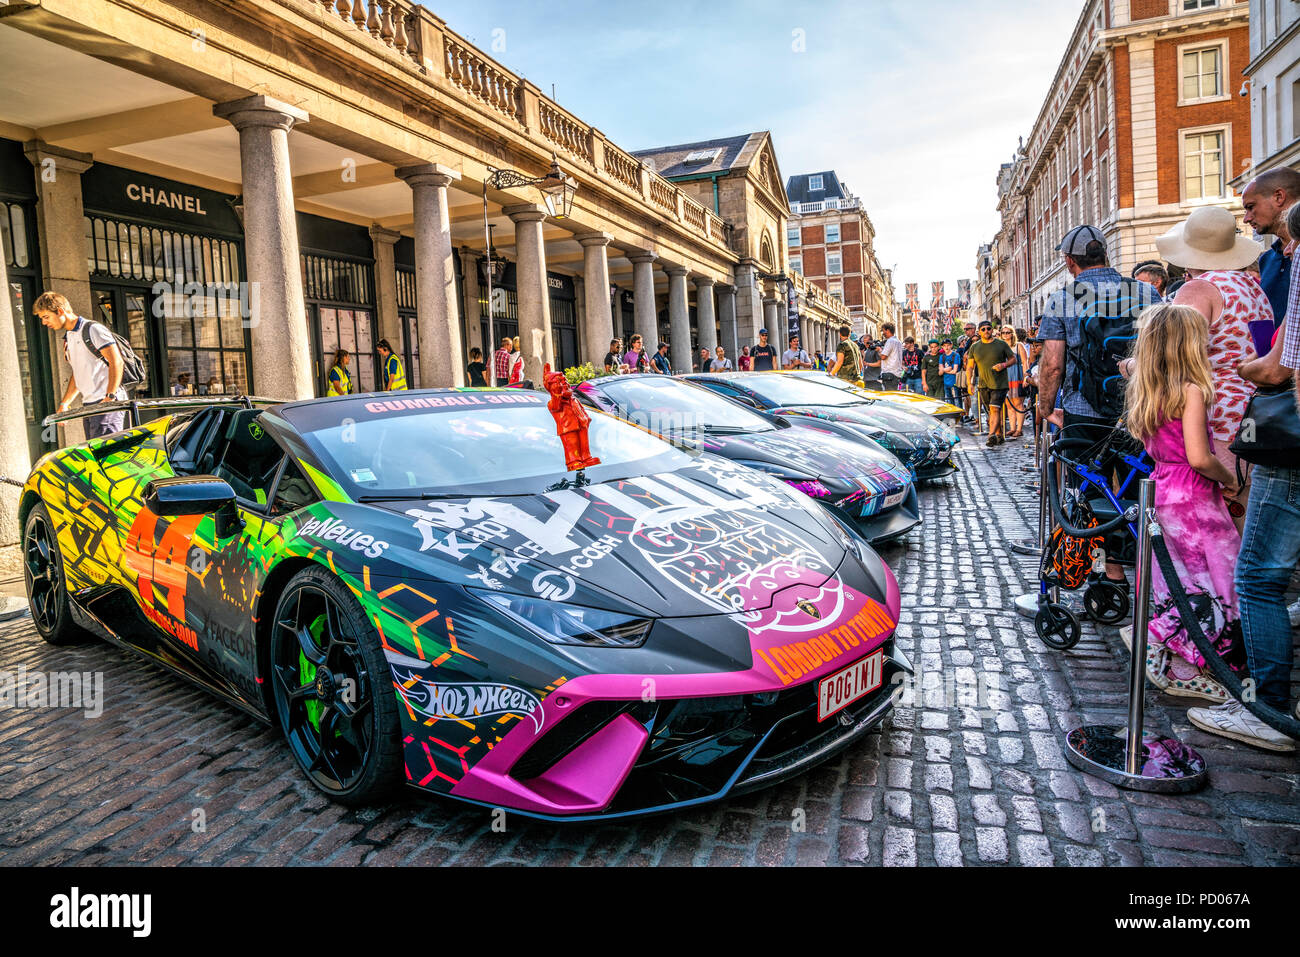 4 August 2018 - London, England. Supercar Lamborghini Aventador is displayed at Covent Garden, London for the famous Gumball 3000 rally event. Stock Photo